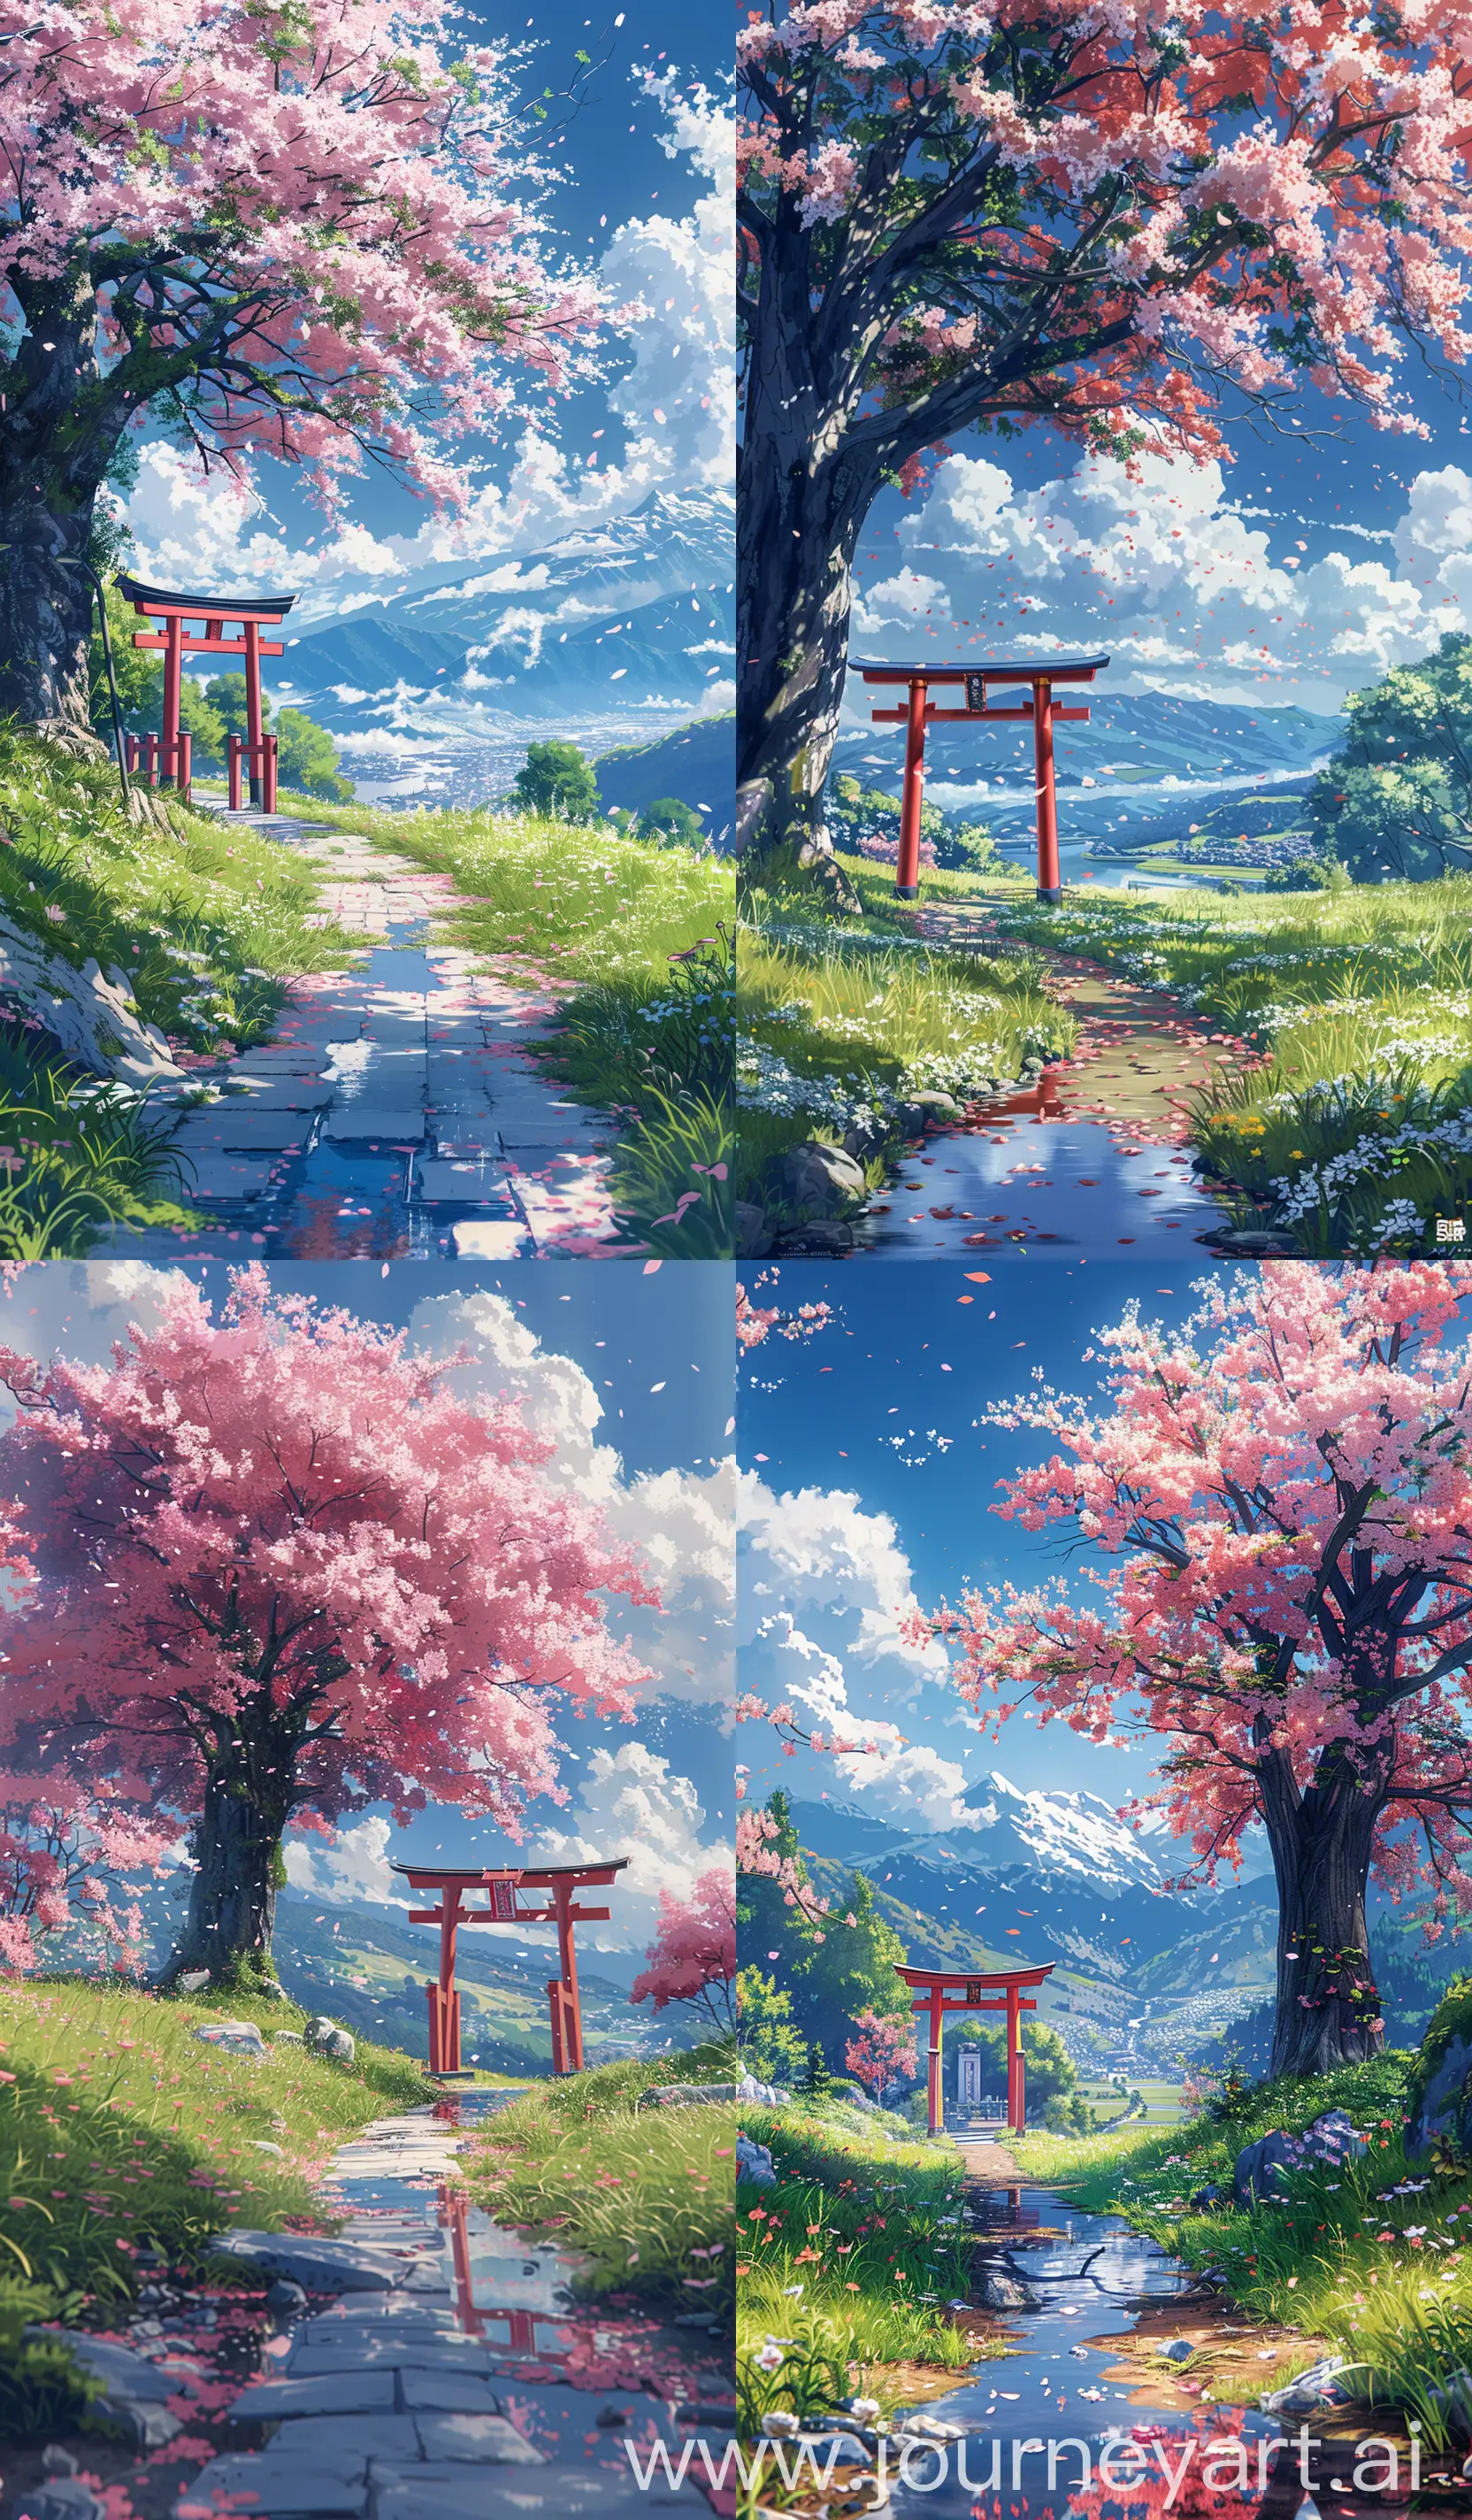 Beautiful anime scenary, mokoto shinkai style, country side walk way, big cheery blossom tree, "red tori gate front of cherry blossom tree", grass and flowers, small water flowing, Switzerland country side, morning view, illustration, 4k picture, "ultra HD", high quality, beautiful summer,sharp and smooth details, no blurry picture, no hyperrealistic --ar 10:17 --s 400 